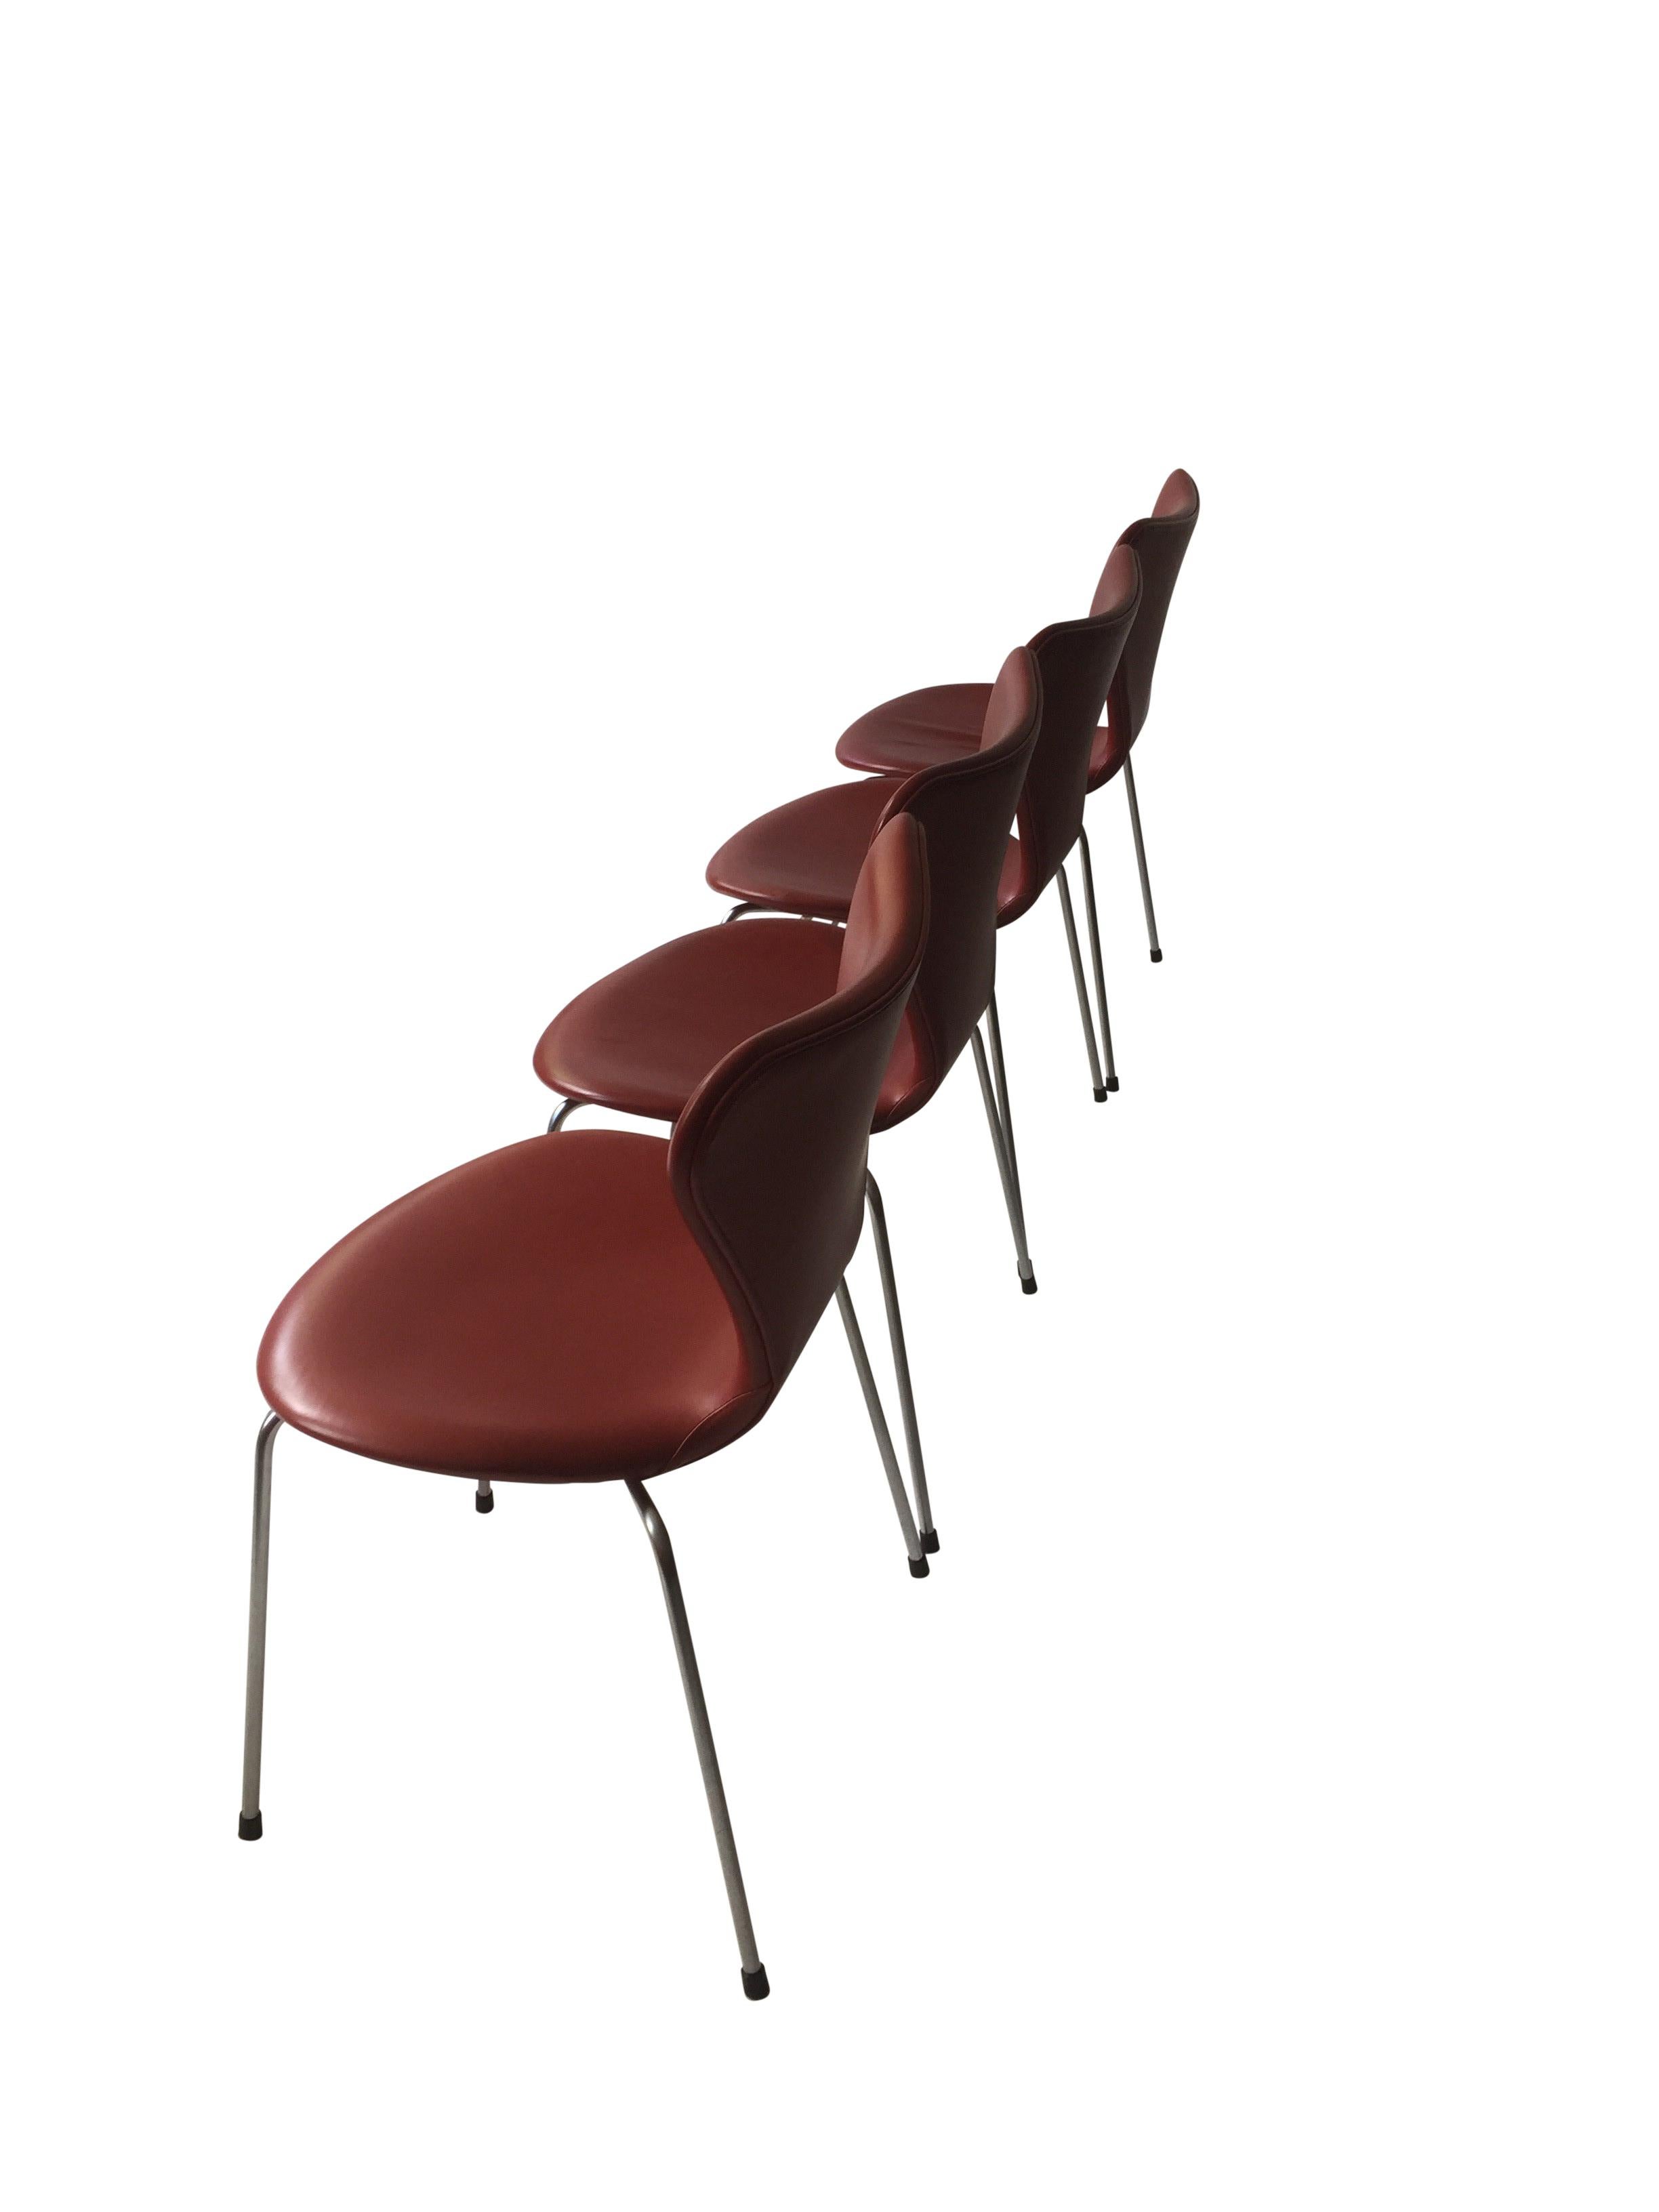 Scandinavian Modern Set of Eight Danish Dining Chairs in Indian Red Leather by Arne Jacobsen 1960s For Sale